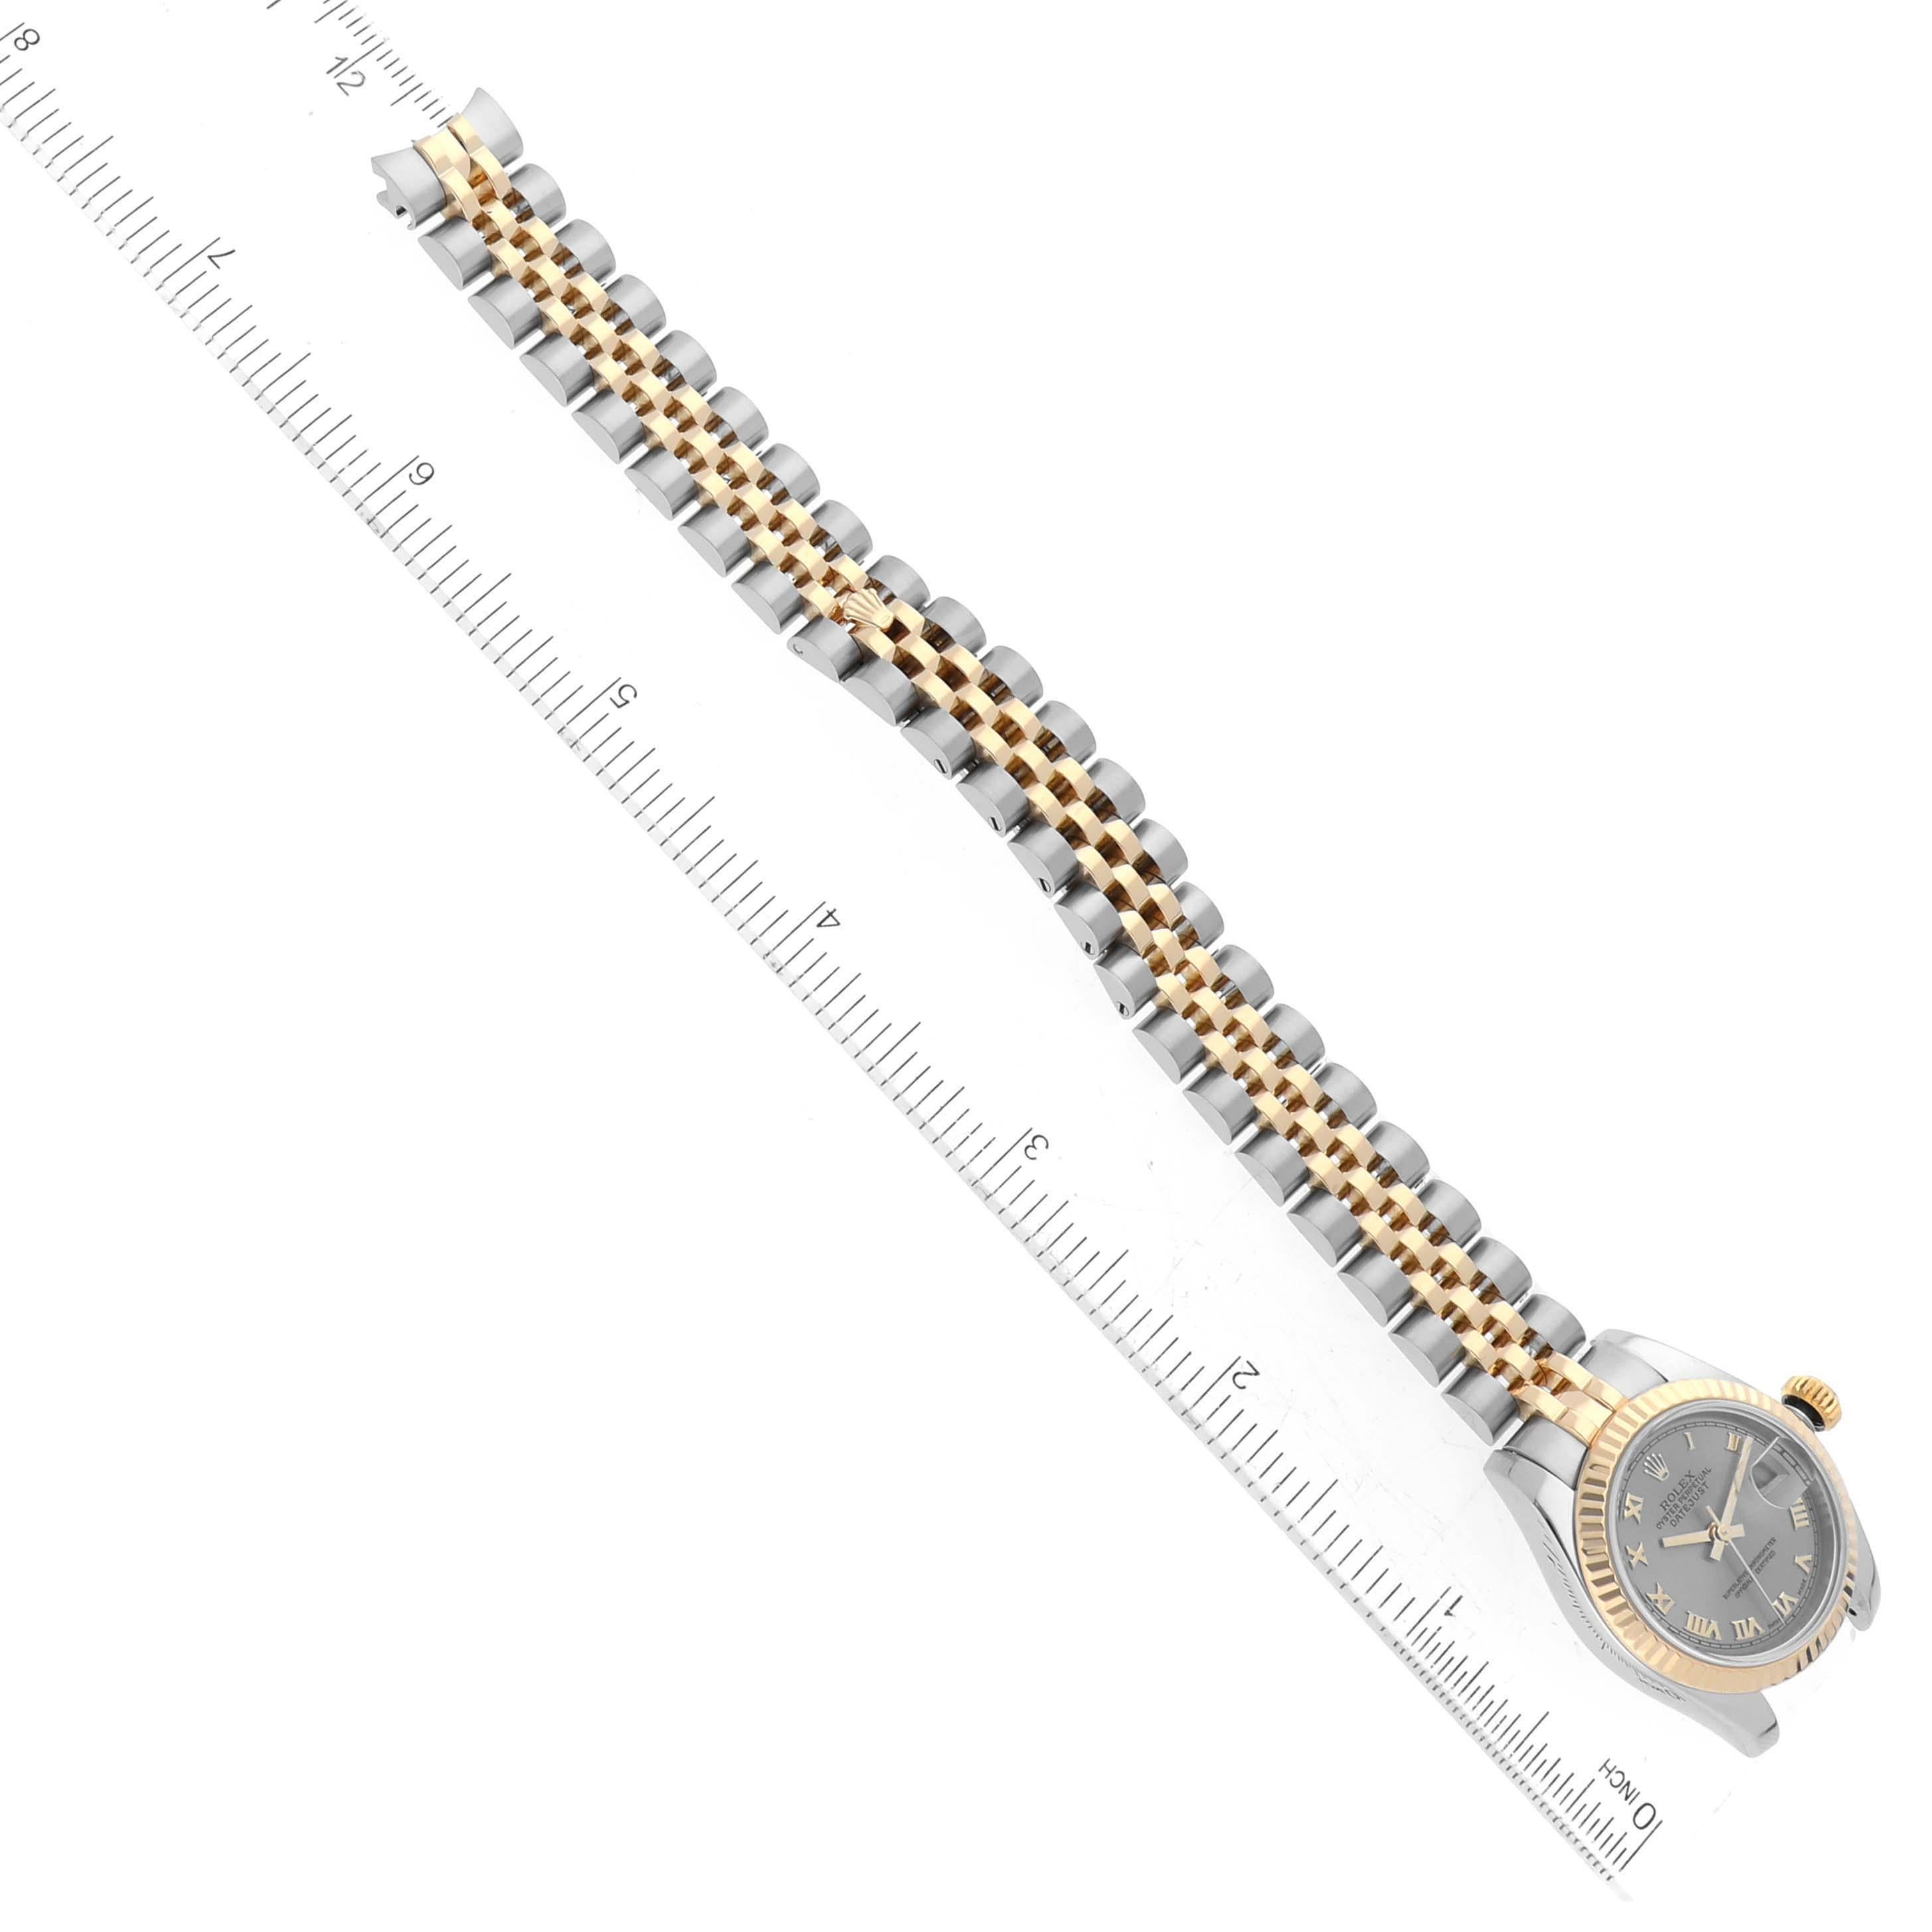 Rolex Datejust Steel Yellow Gold Slate Dial Ladies Watch 179173 Box Card For Sale 7